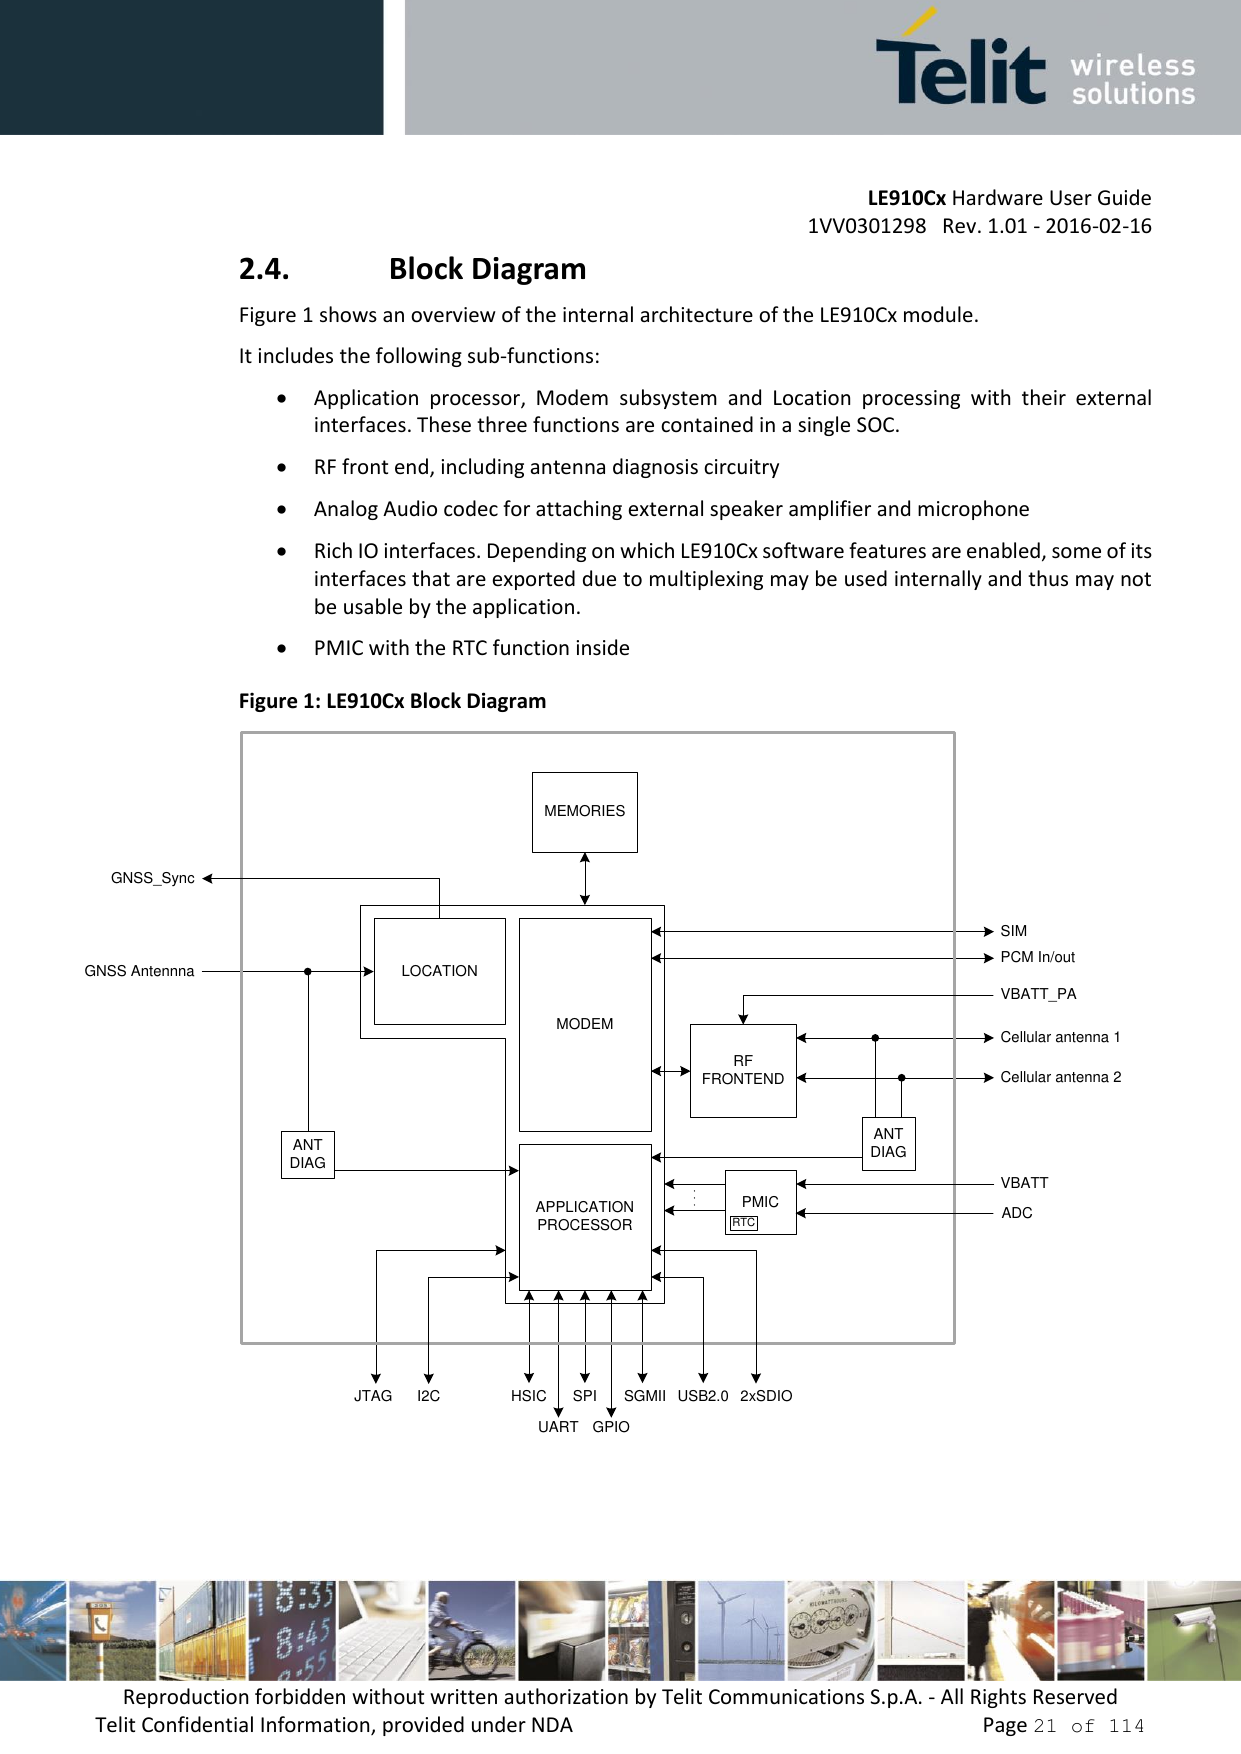         LE910Cx Hardware User Guide     1VV0301298   Rev. 1.01 - 2016-02-16 Reproduction forbidden without written authorization by Telit Communications S.p.A. - All Rights Reserved Telit Confidential Information, provided under NDA                 Page 21 of 114 2.4. Block Diagram Figure 1 shows an overview of the internal architecture of the LE910Cx module.  It includes the following sub-functions:  Application  processor,  Modem  subsystem  and  Location  processing  with  their  external interfaces. These three functions are contained in a single SOC.  RF front end, including antenna diagnosis circuitry  Analog Audio codec for attaching external speaker amplifier and microphone  Rich IO interfaces. Depending on which LE910Cx software features are enabled, some of its interfaces that are exported due to multiplexing may be used internally and thus may not be usable by the application.  PMIC with the RTC function inside  Figure 1: LE910Cx Block Diagram ANT DIAGMEMORIESRFFRONTENDGNSS AntennnaGPIOCellular antenna 1Cellular antenna 2PCM In/outSIMGNSS_SyncAPPLICATION PROCESSORMODEMLOCATION HSICI2CANT DIAGUSB2.0SGMIISPIUARTJTAG 2xSDIOPMICVBATTADCVBATT_PARTC    